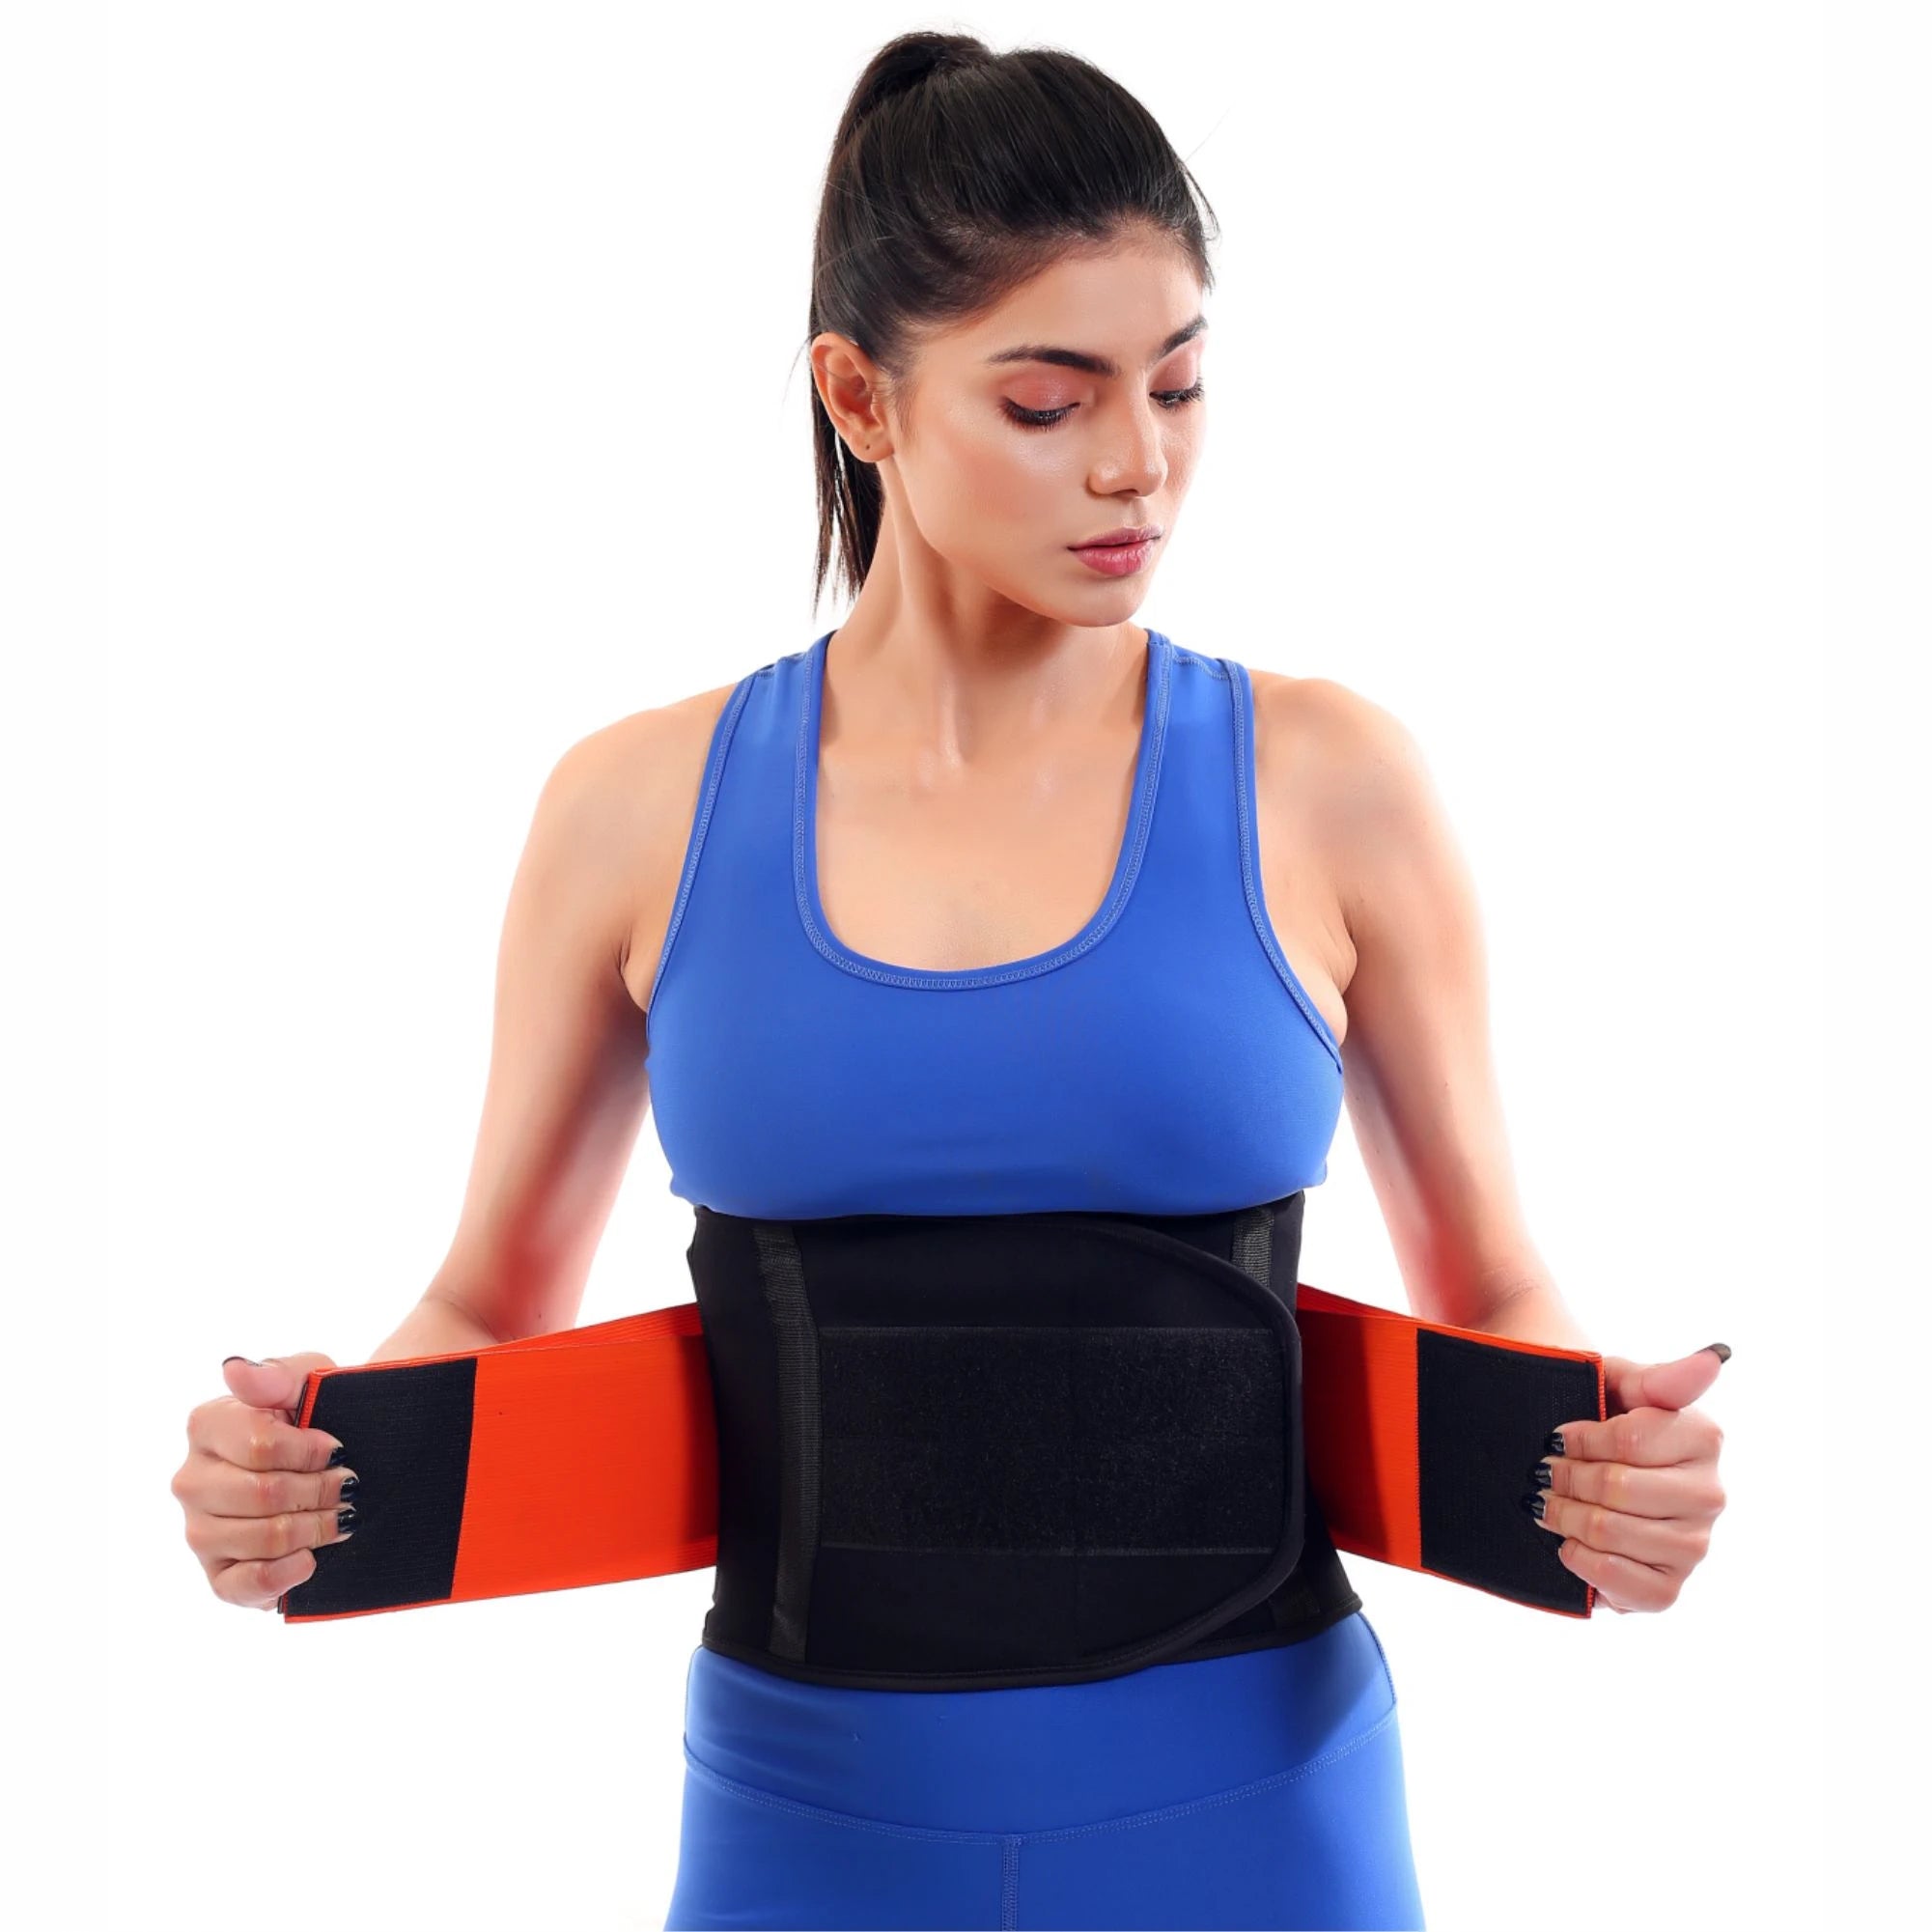 Xtreme Thermo Power Womens Hot Shapers Slimming Belt Girdle Belt Underbust  Control, Slimming Waist Trainer, Tummy Control Cincher T200707 From Luo04,  $14.29